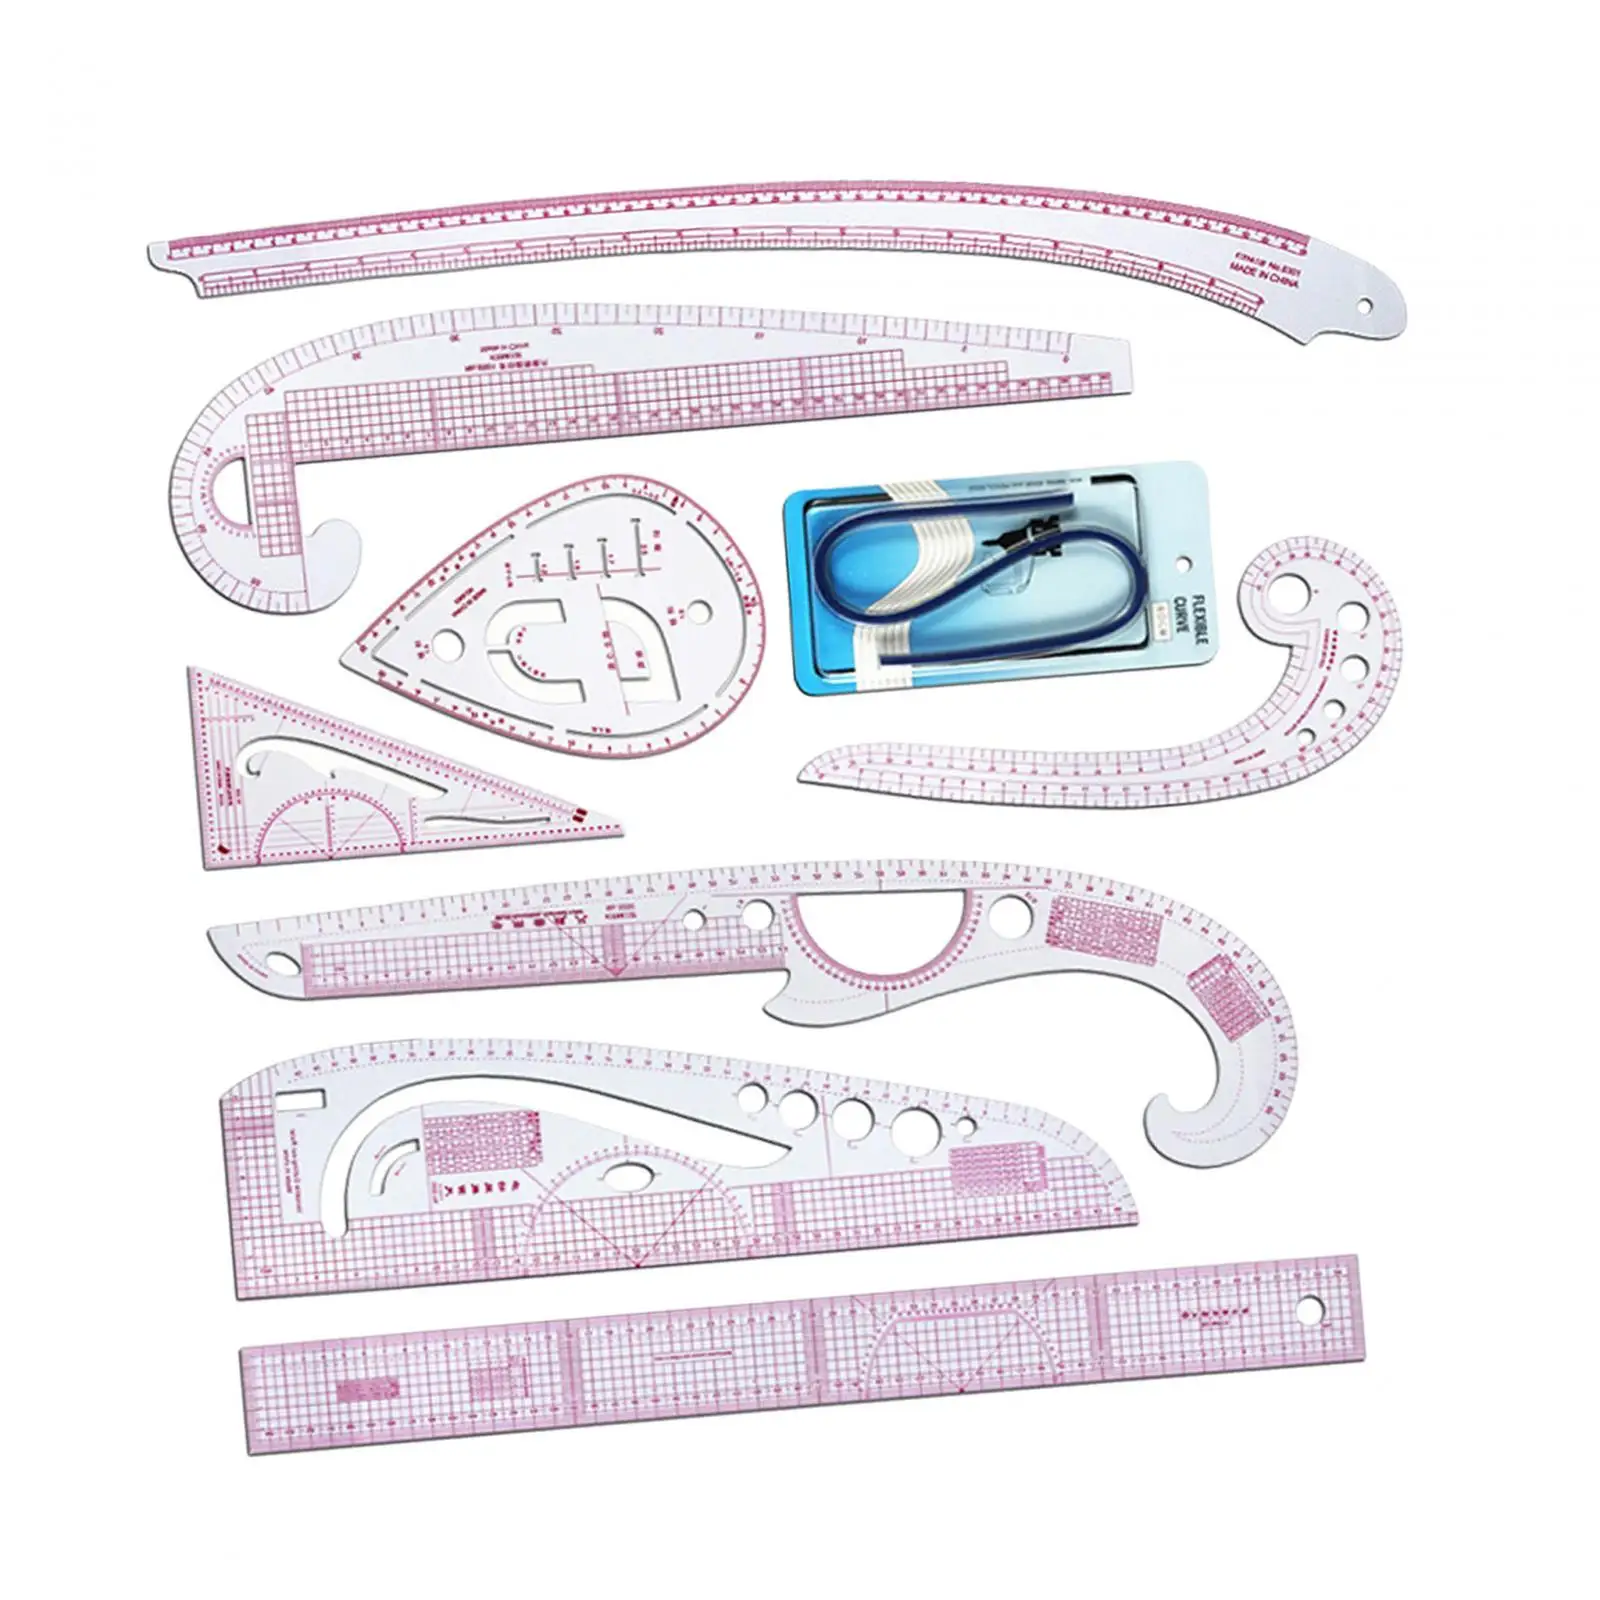 Style Sew French Curve Ruler Set Measuring Tools Bendable School Student Teaching Metric Rulers Set for Designers Sewing Tailors